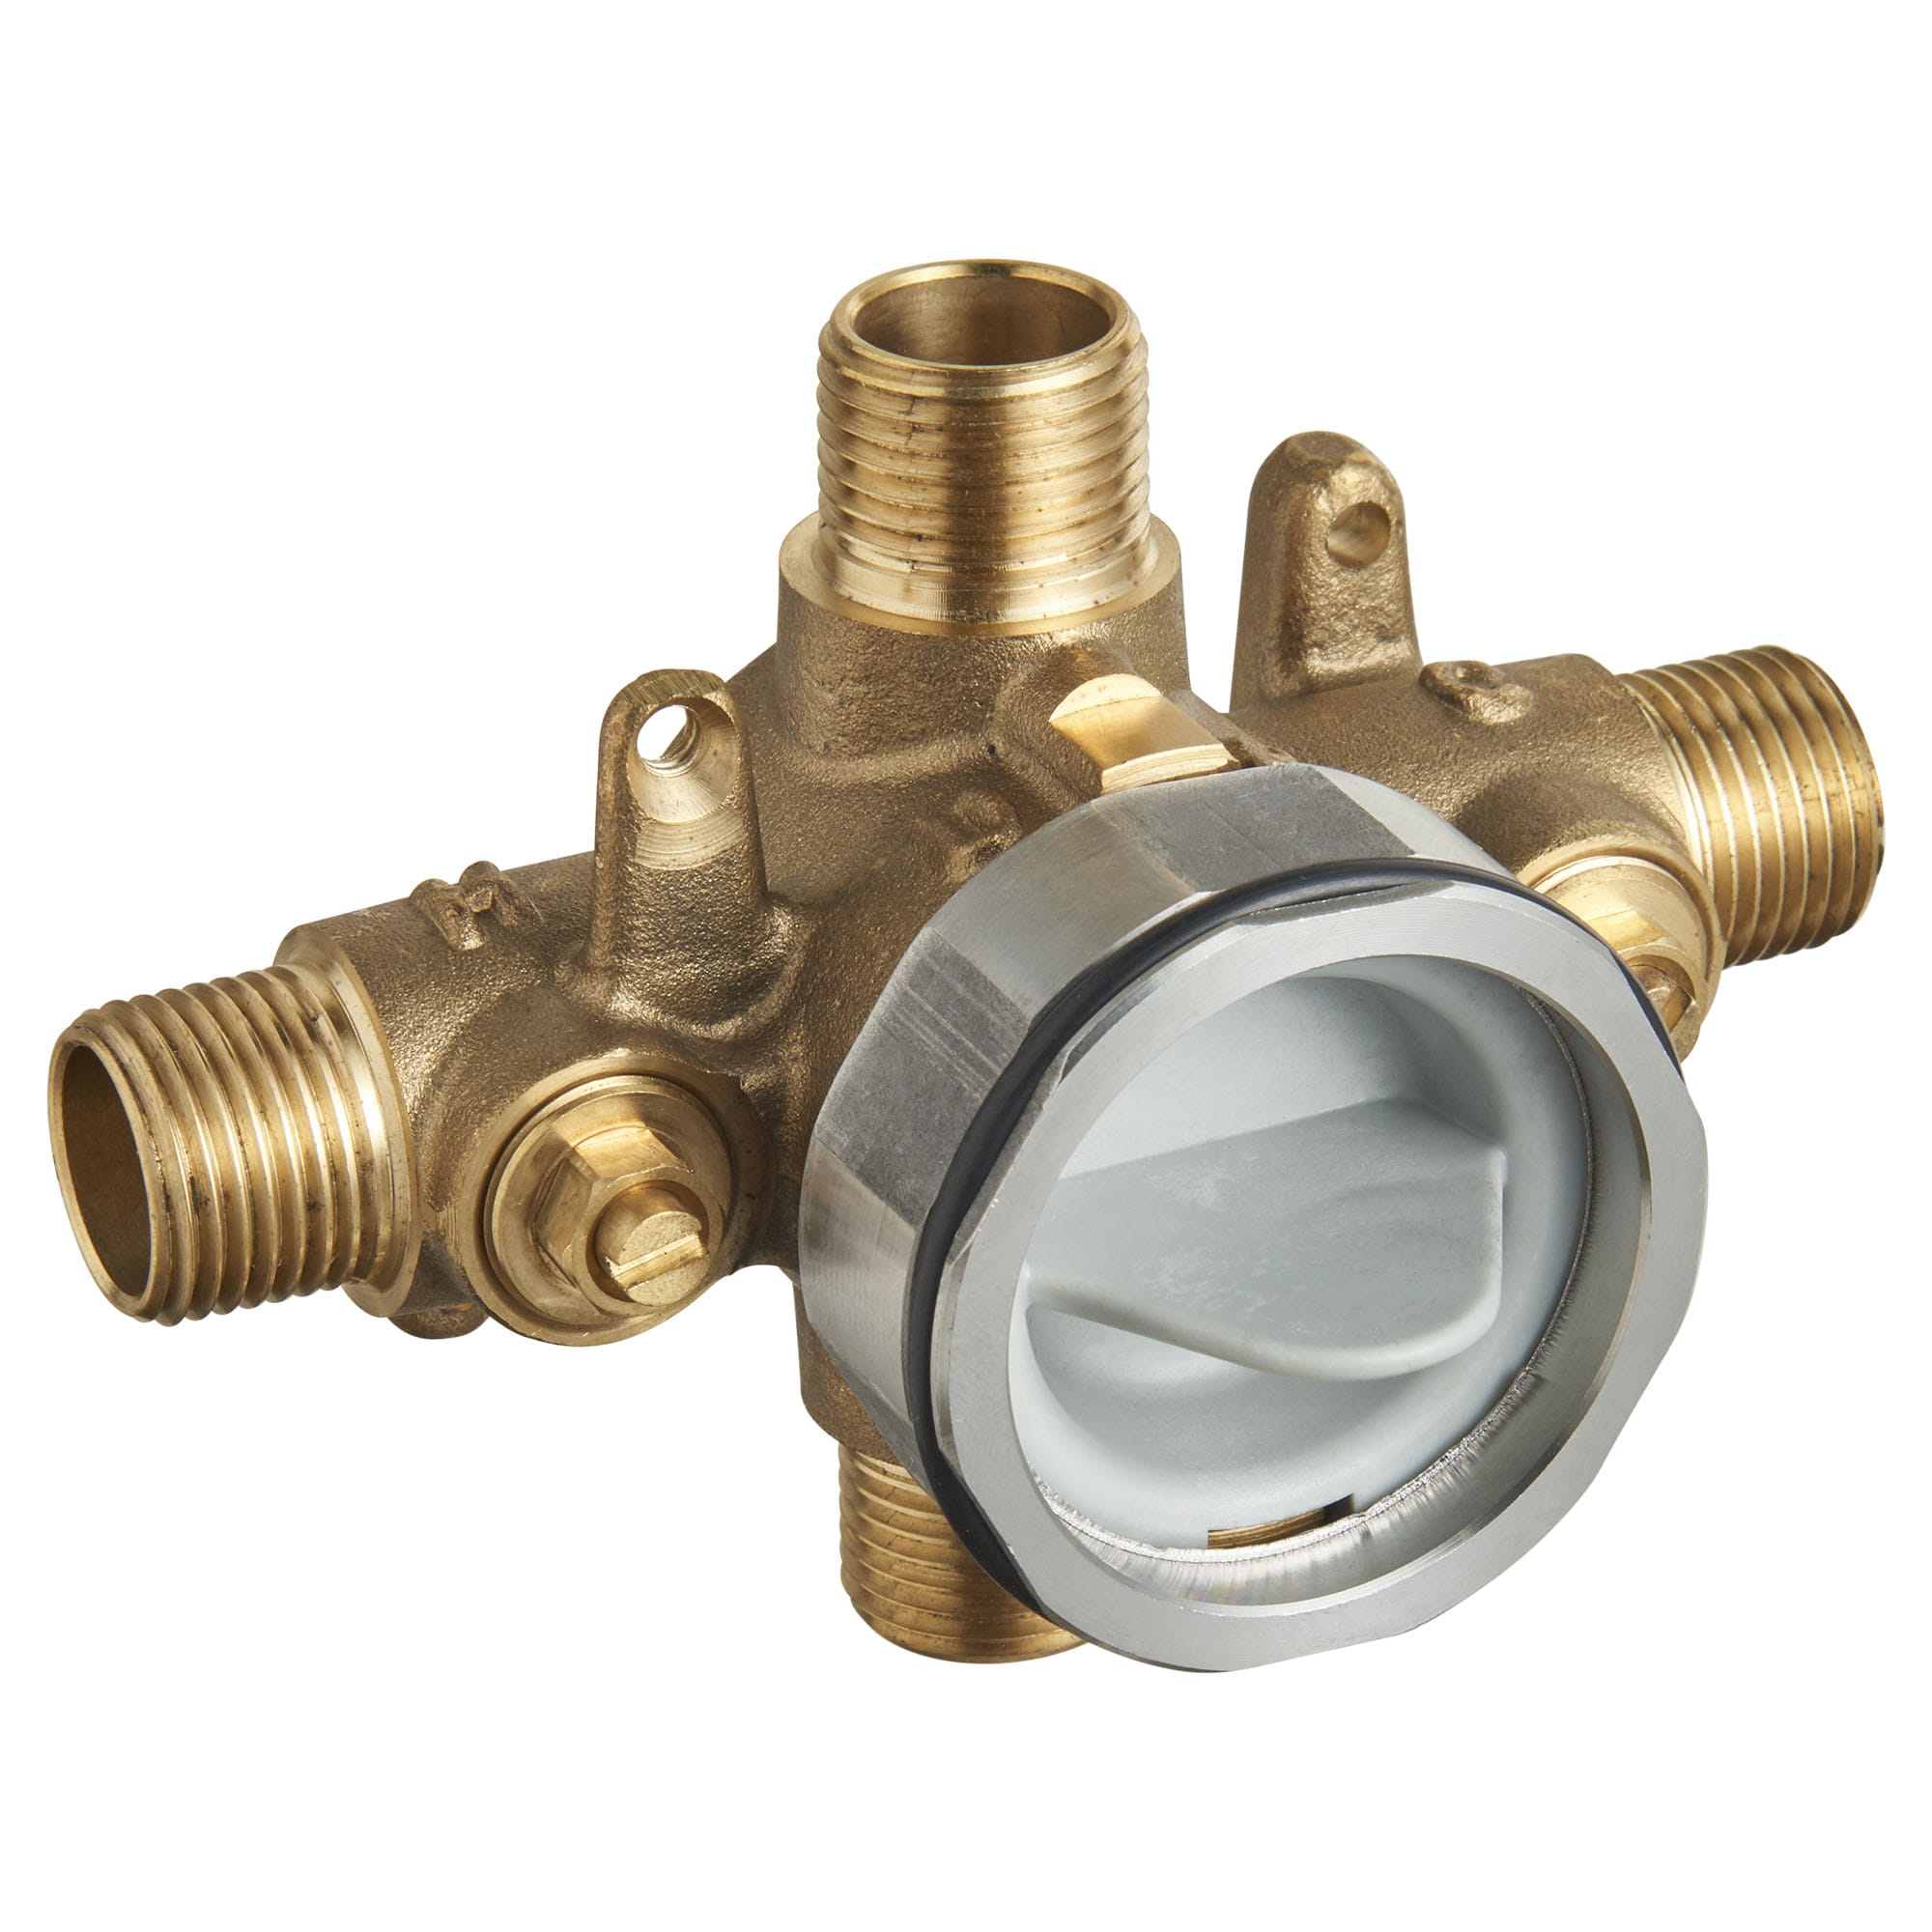 Flash® Shower Rough-In Valve With Universal Inlets/Outlets With Screwdriver Stops